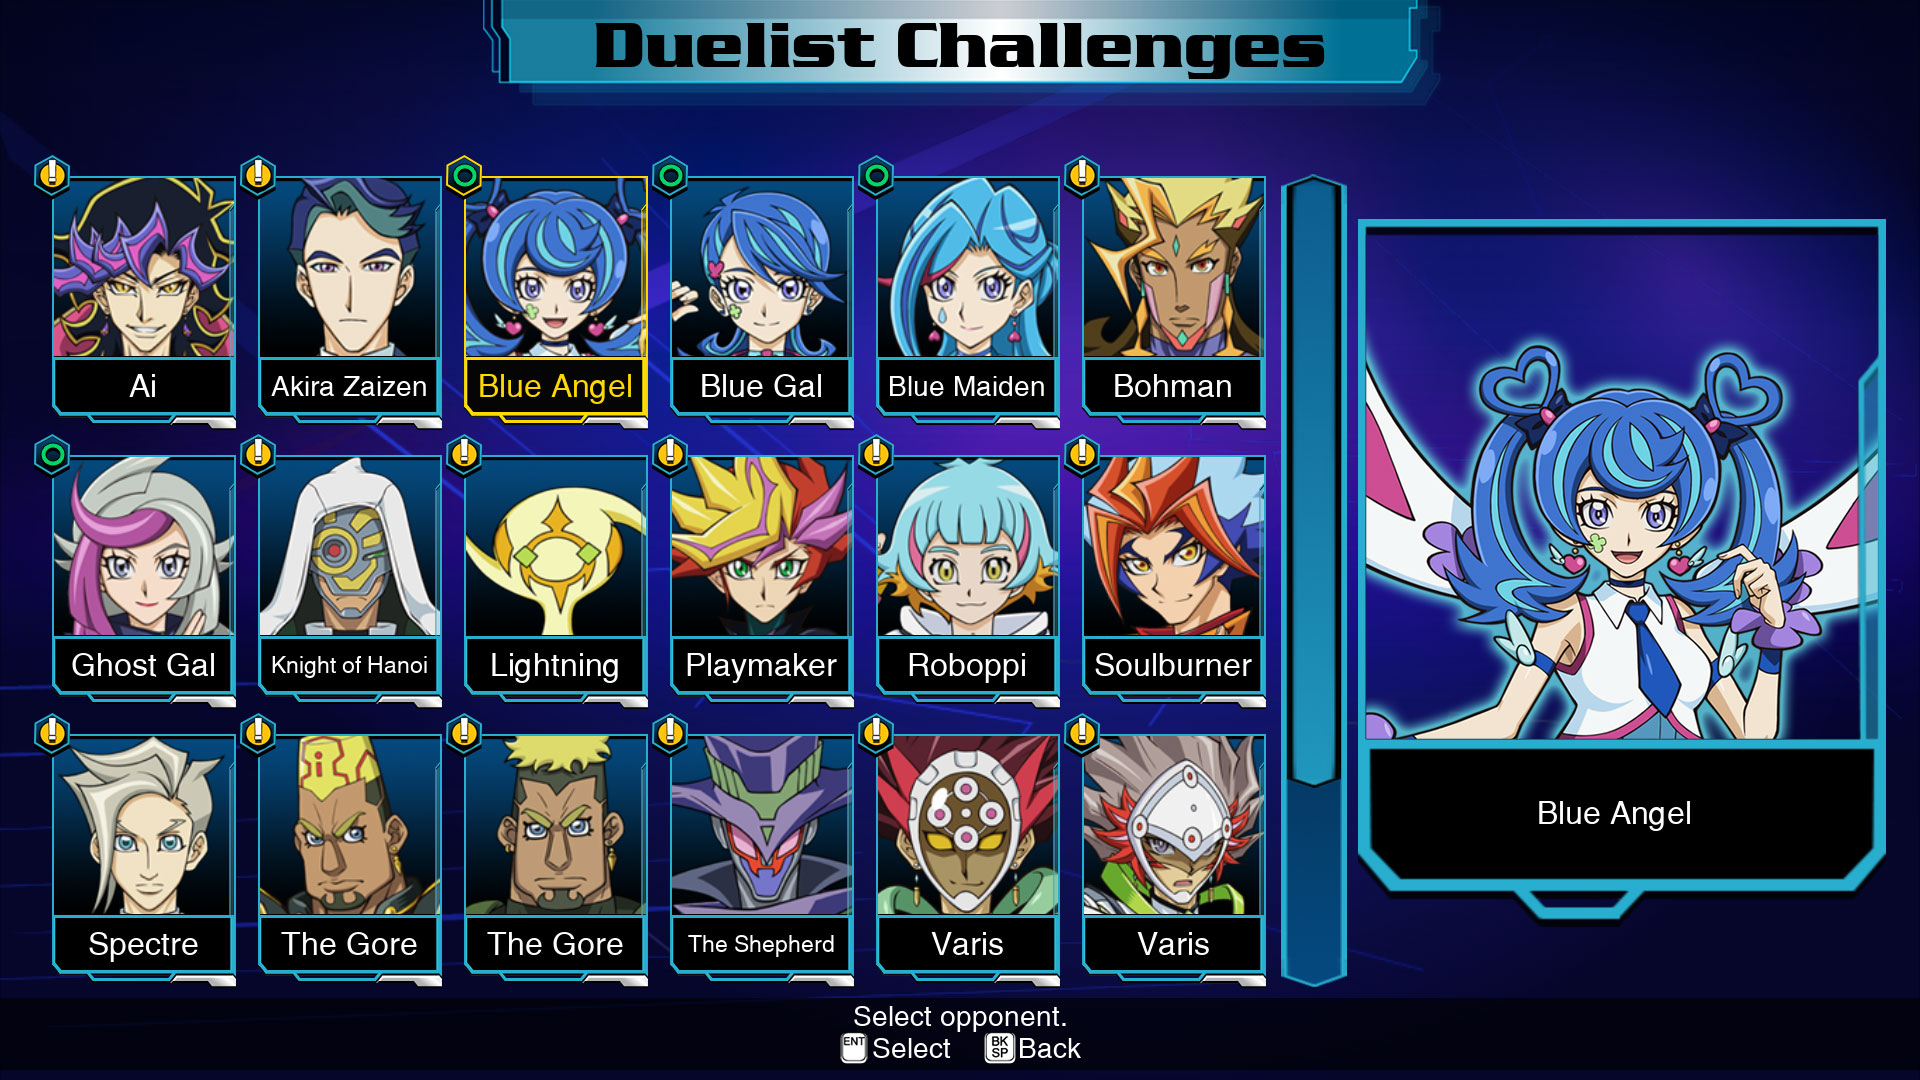 yugioh legacy of the duelist card packs